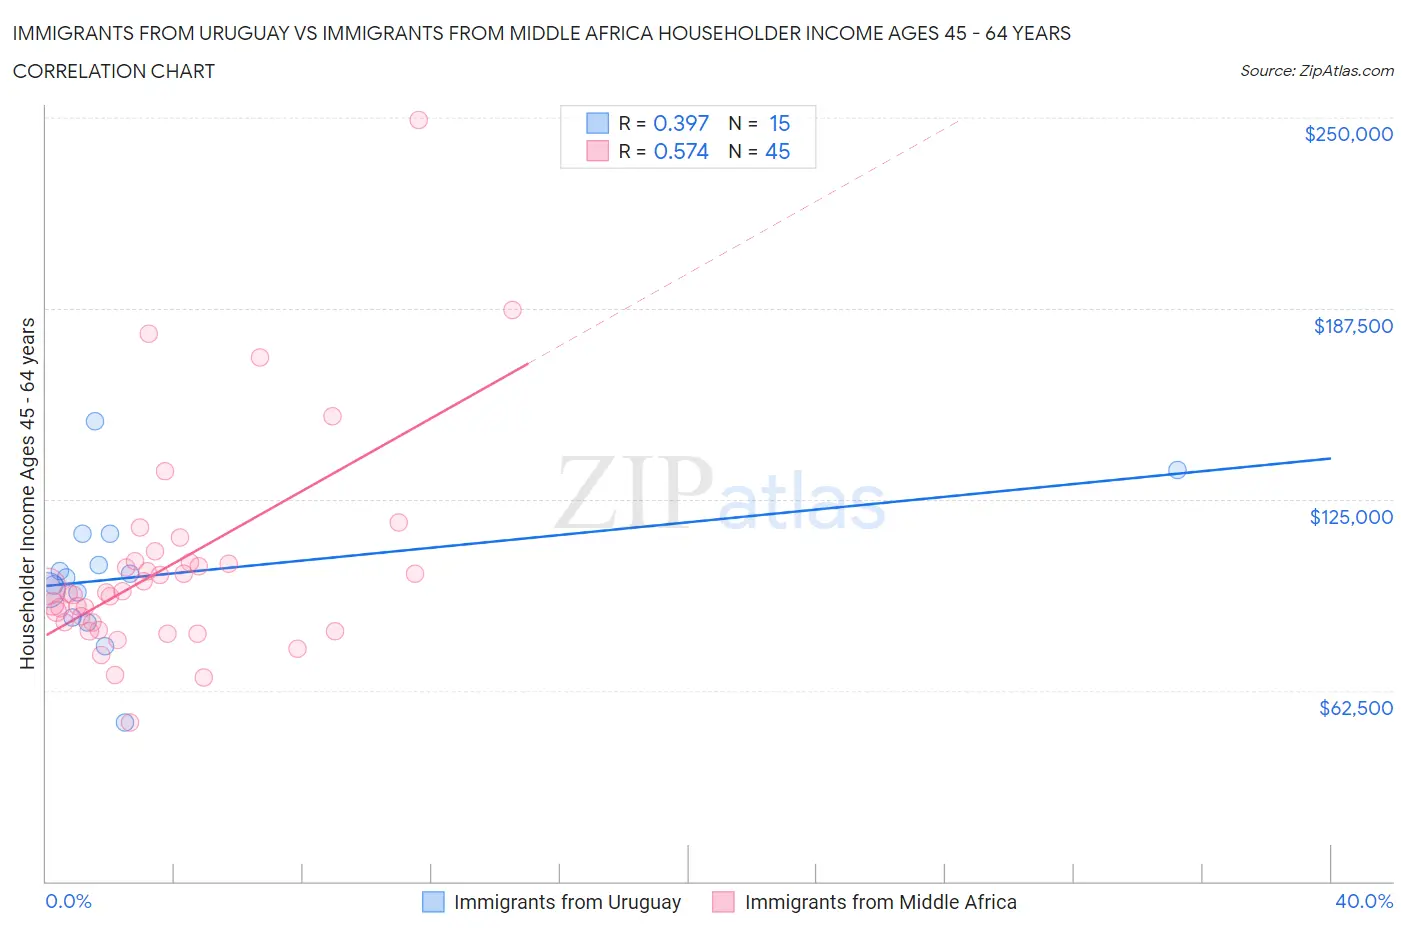 Immigrants from Uruguay vs Immigrants from Middle Africa Householder Income Ages 45 - 64 years